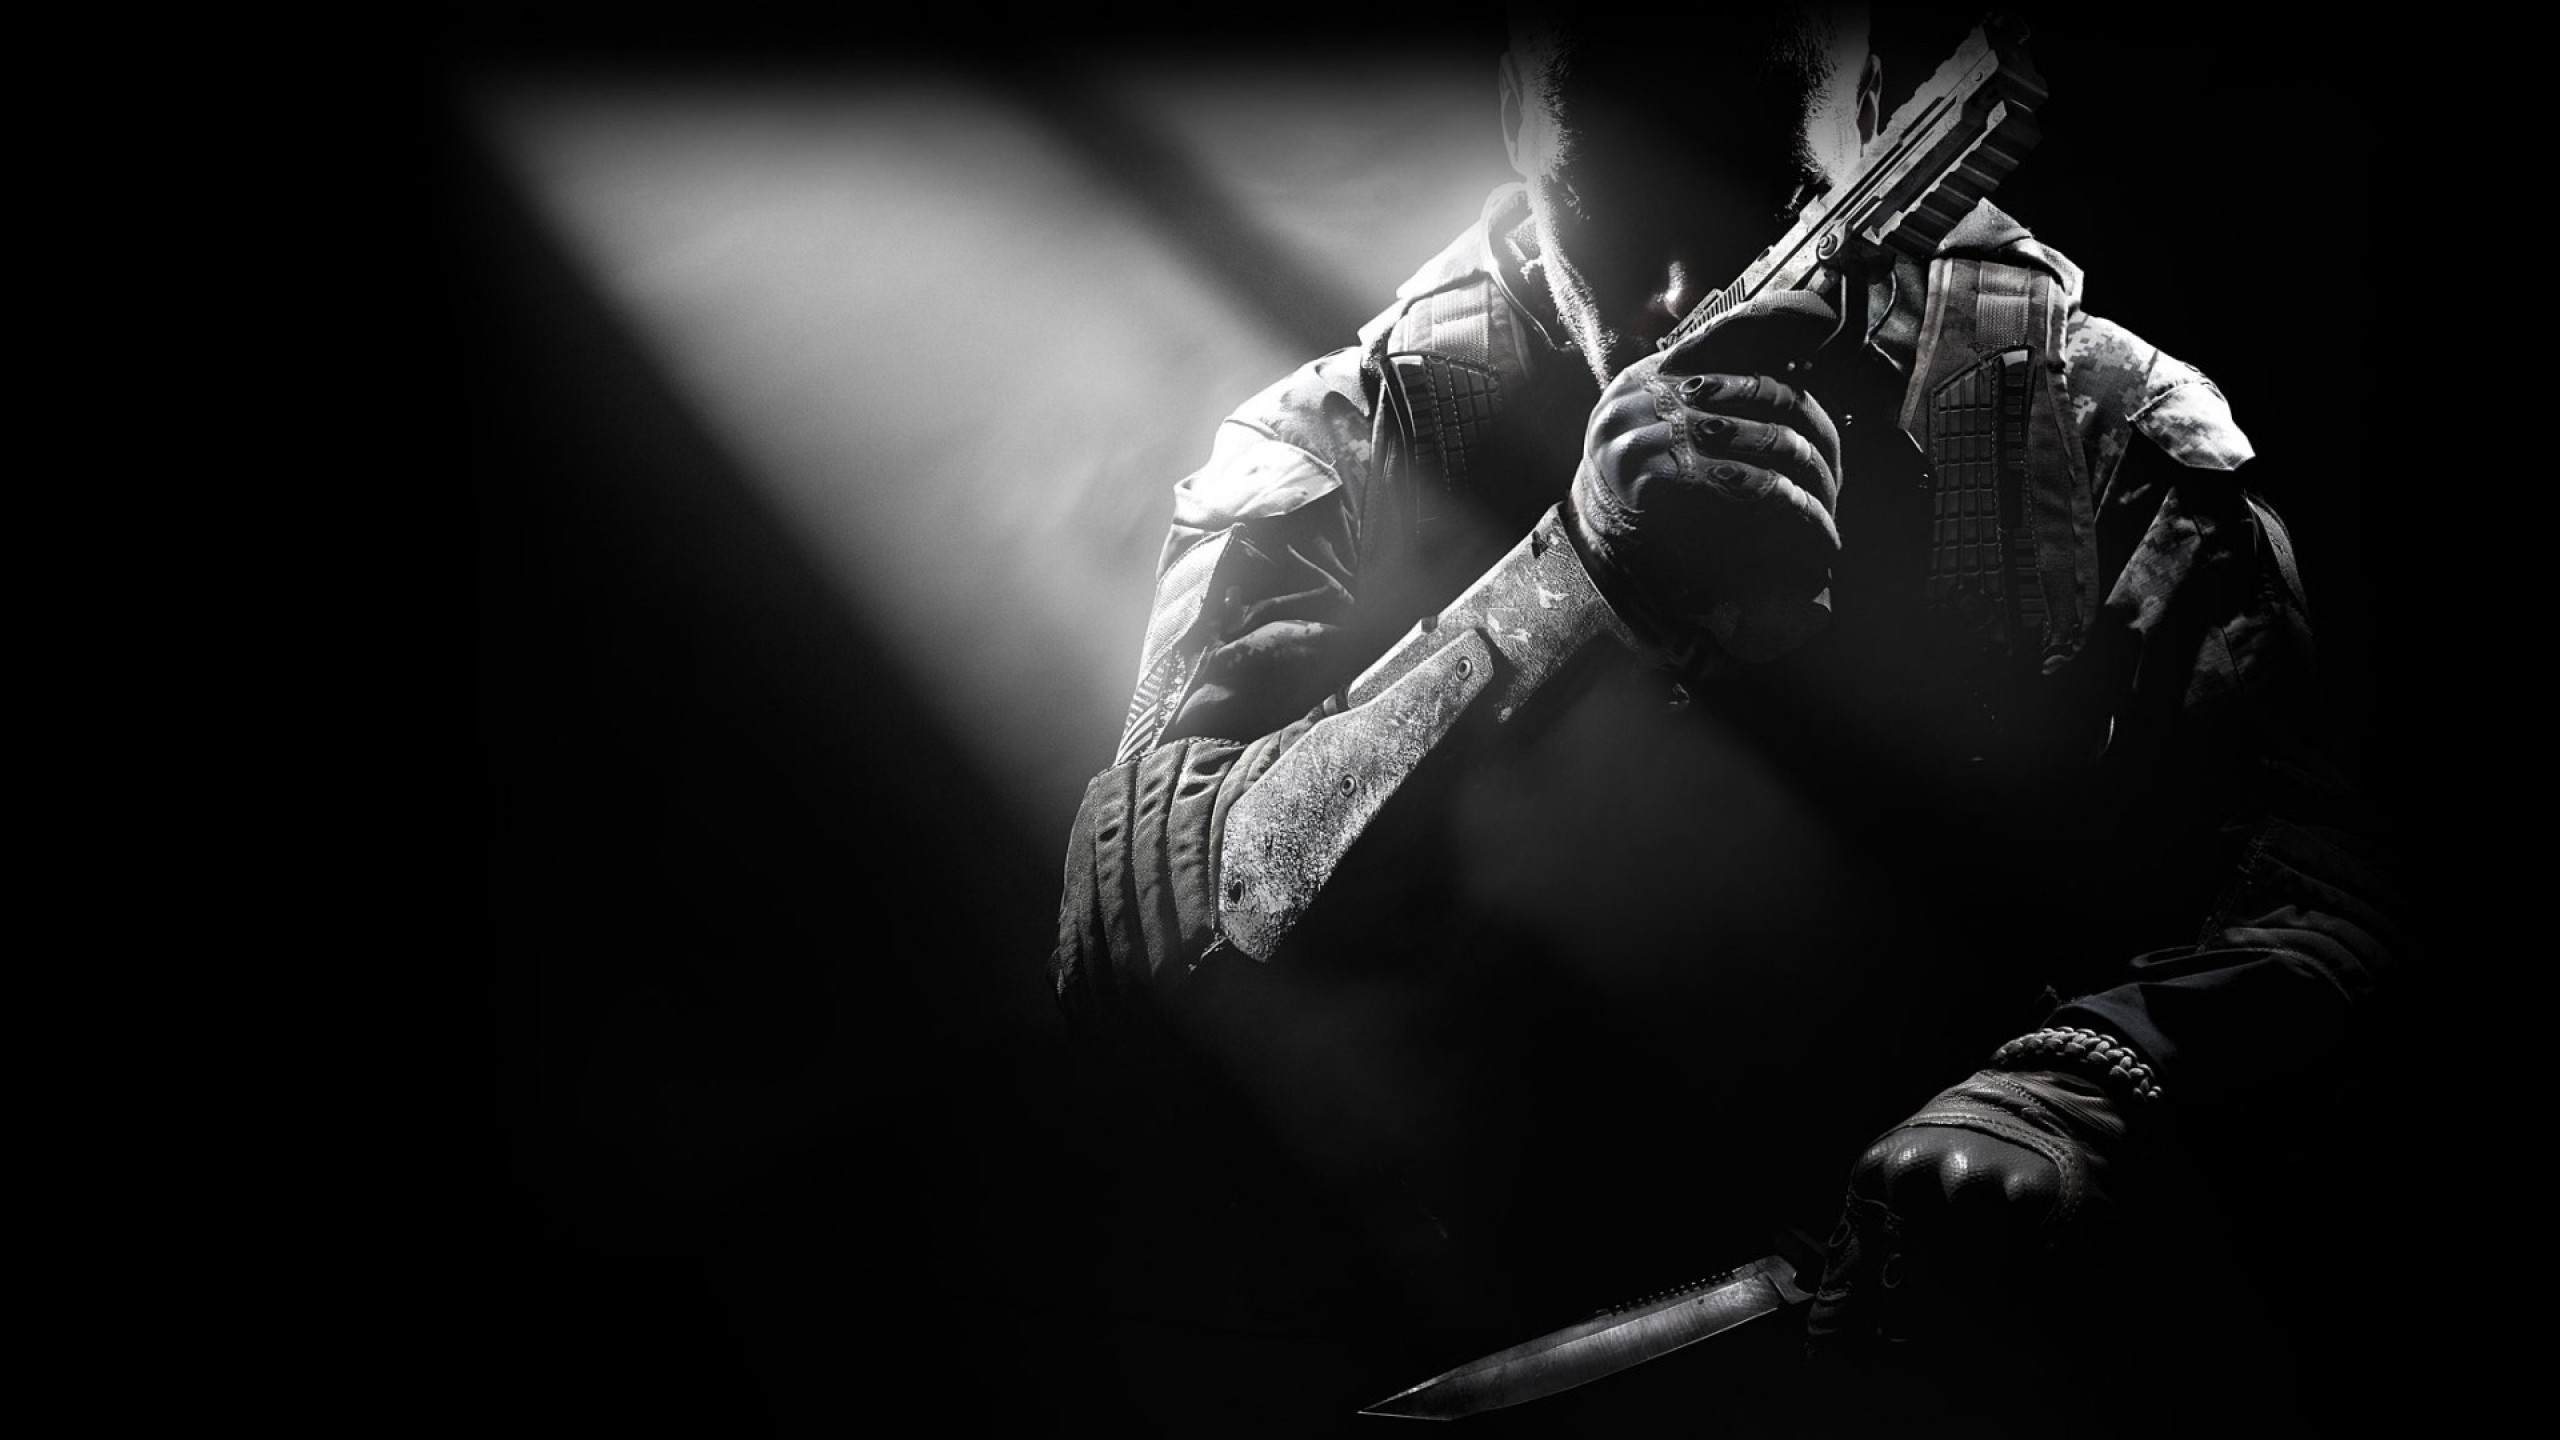 video, Games, Call, Of, Duty, Black, Background, Call, Of, Duty, Black, Ops, 2, Black, Ops, 2, Pc, Games Wallpaper